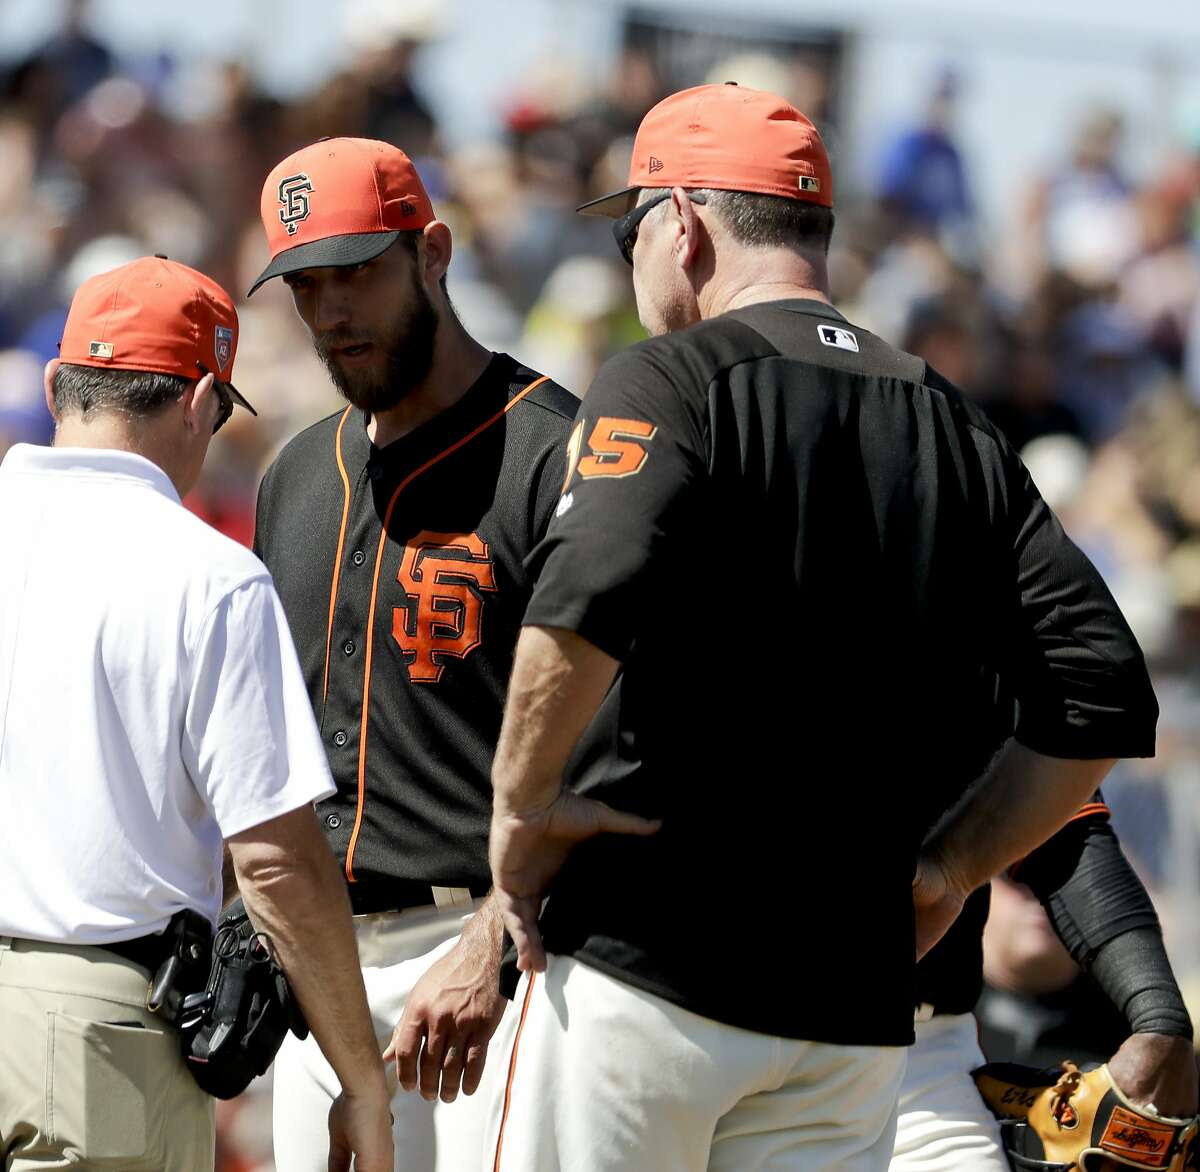 San Francisco Giants starting pitcher Madison Bumgarner, center, is looked over by manager Bruce Bochy, right, and a trainer after getting hit in the arm by a batted ball during the third inning of a spring baseball game against the Kansas City Royals in Scottsdale, Ariz., Friday, March 23, 2018. (AP Photo/Chris Carlson)